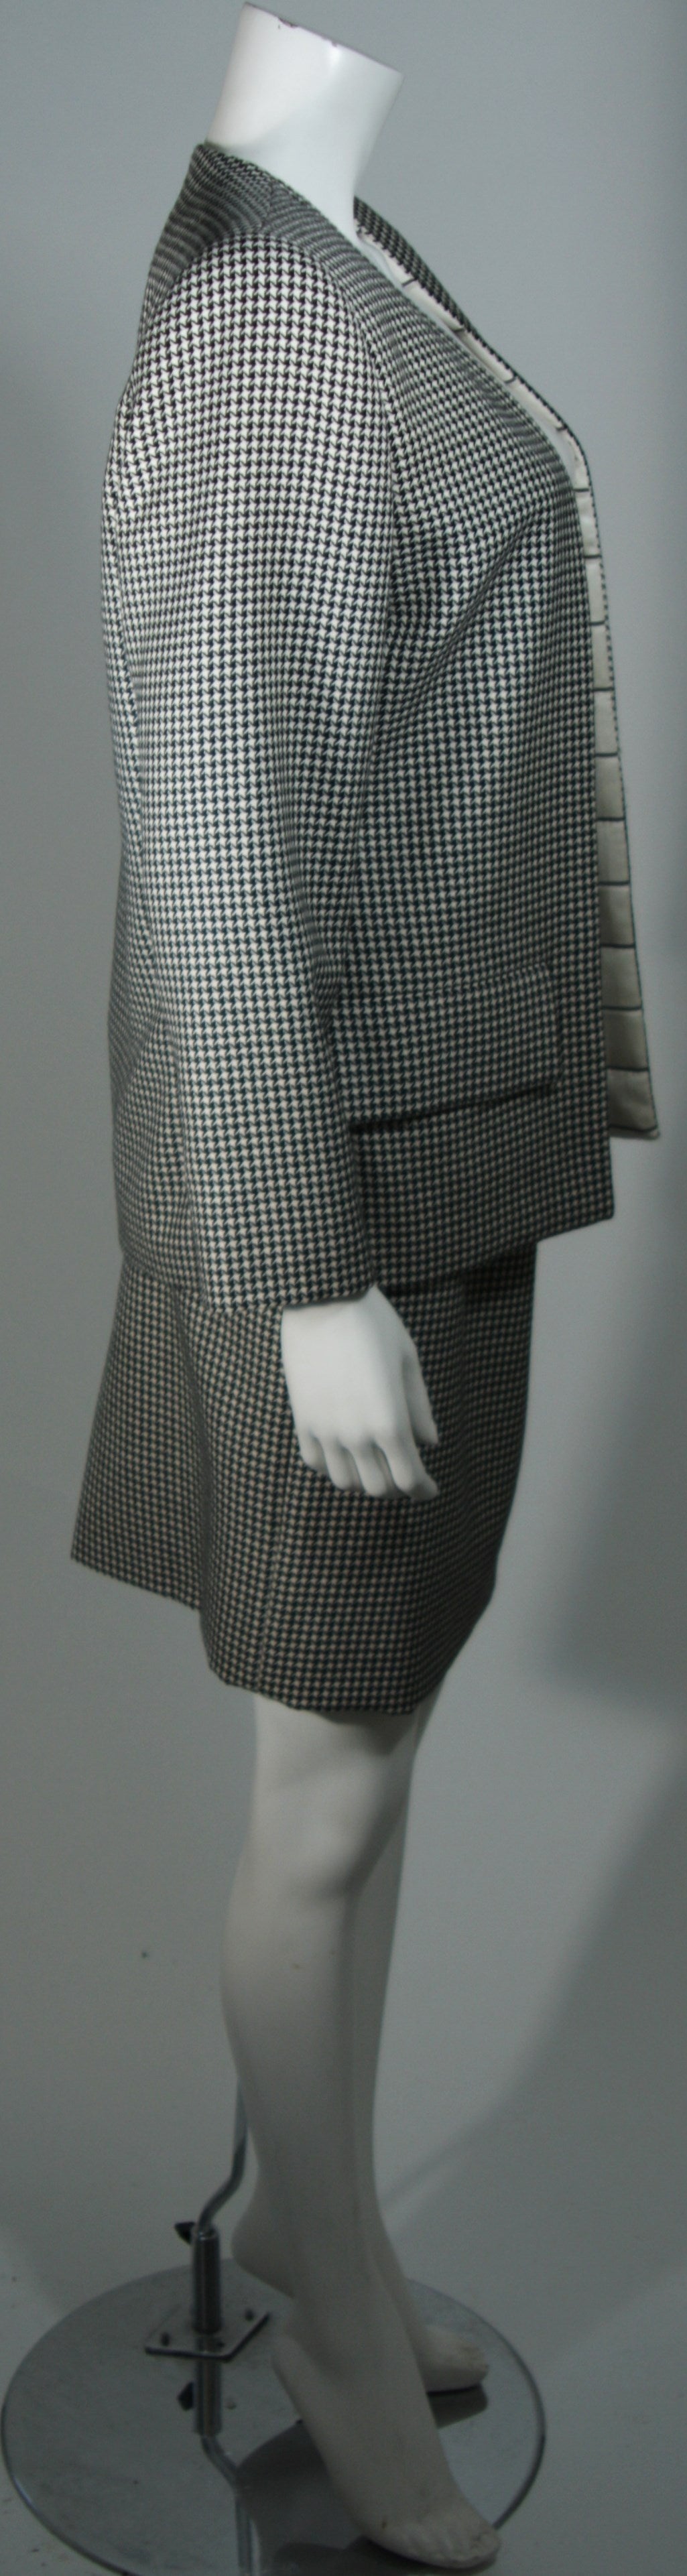 Galanos Couture Grey Houndstooth Skirt Suit Size 2 4 1